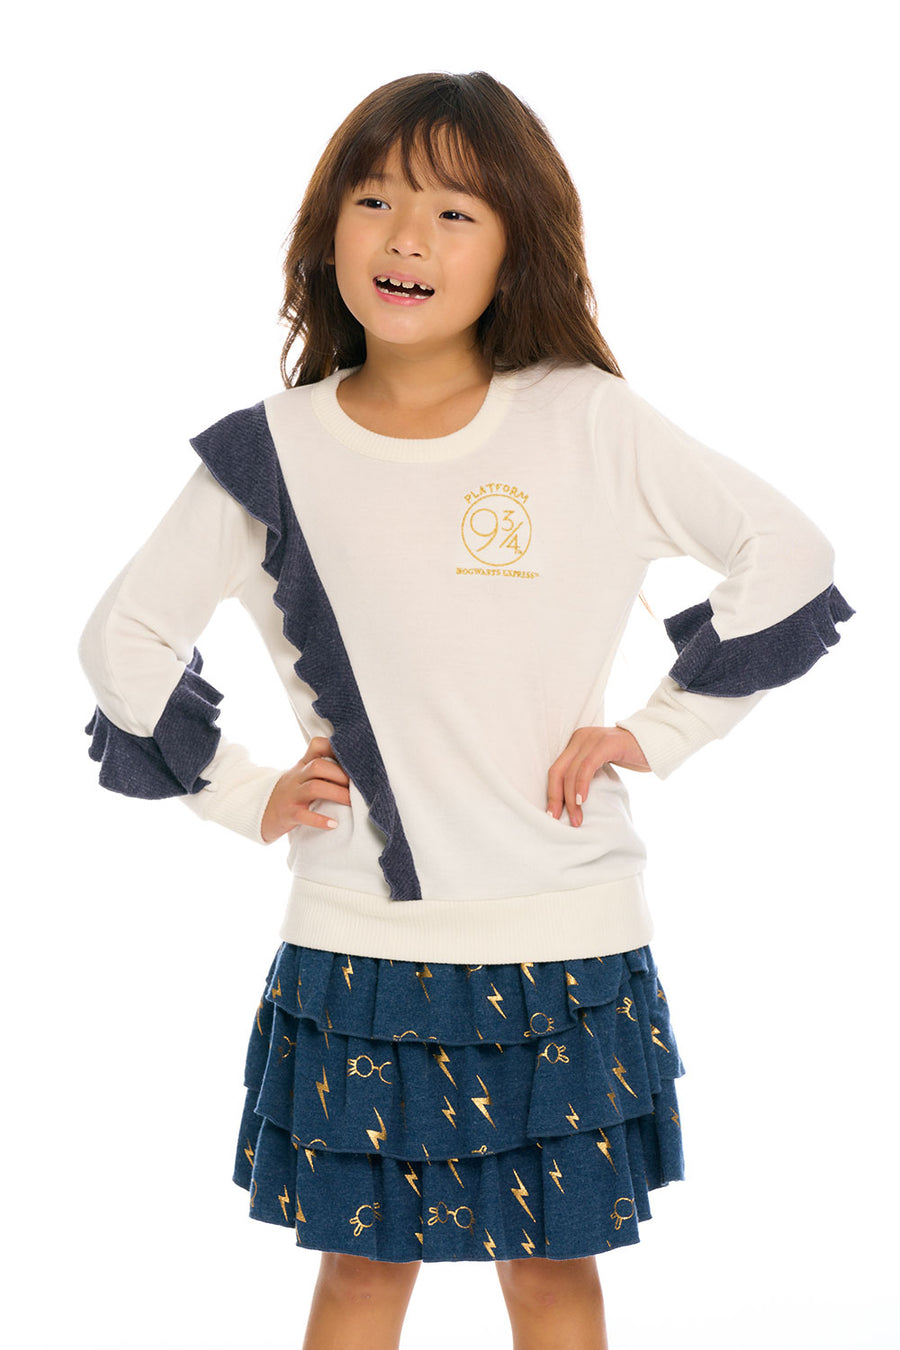 Harry Potter - Hogwarts Ruffle Pullover GIRLS chaserbrand